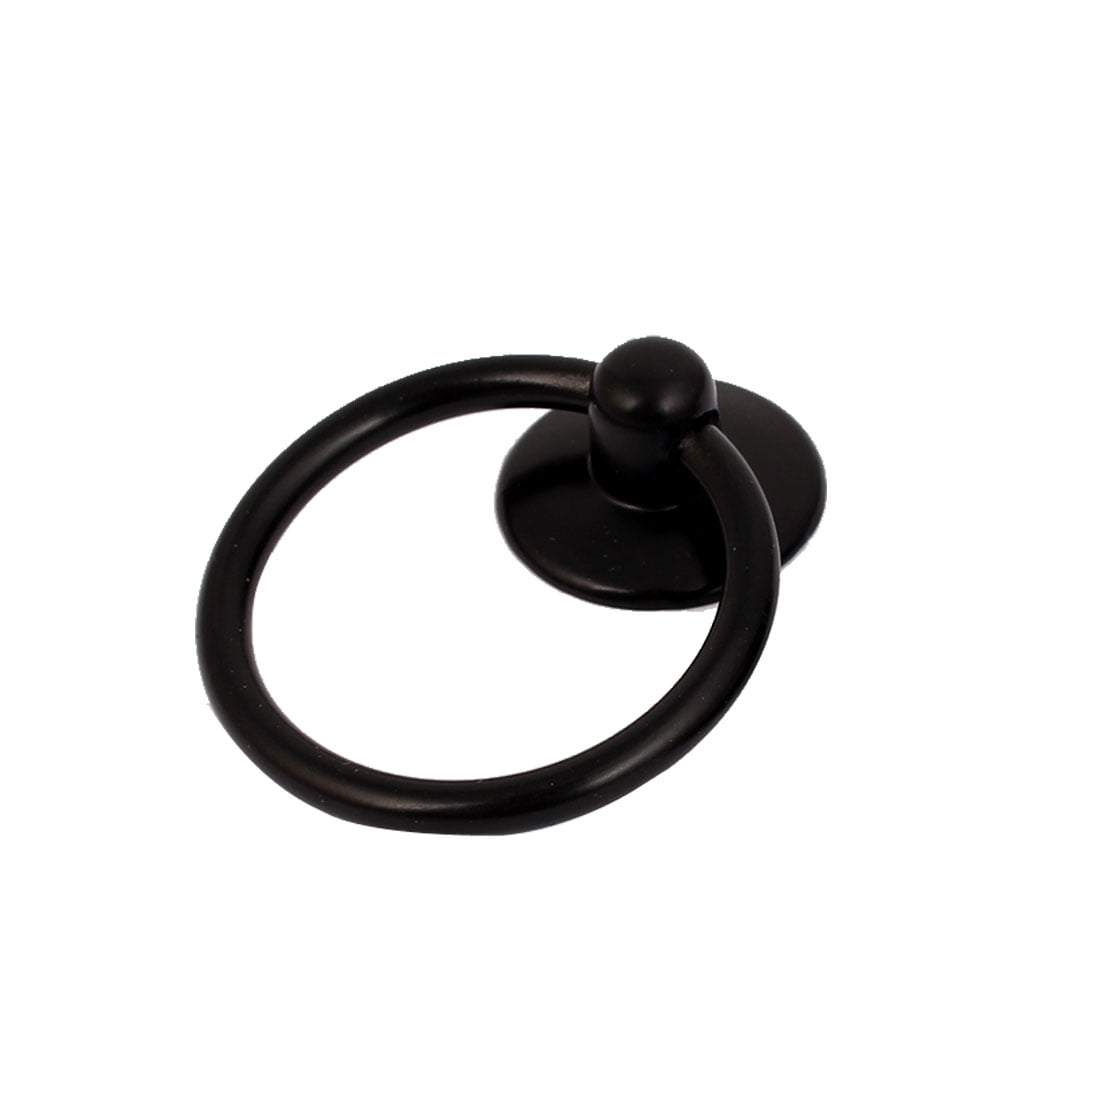 uxcell Cupboard Cabinet Drawer Dresser Rings Pulls Knob Black a16062000ux0477